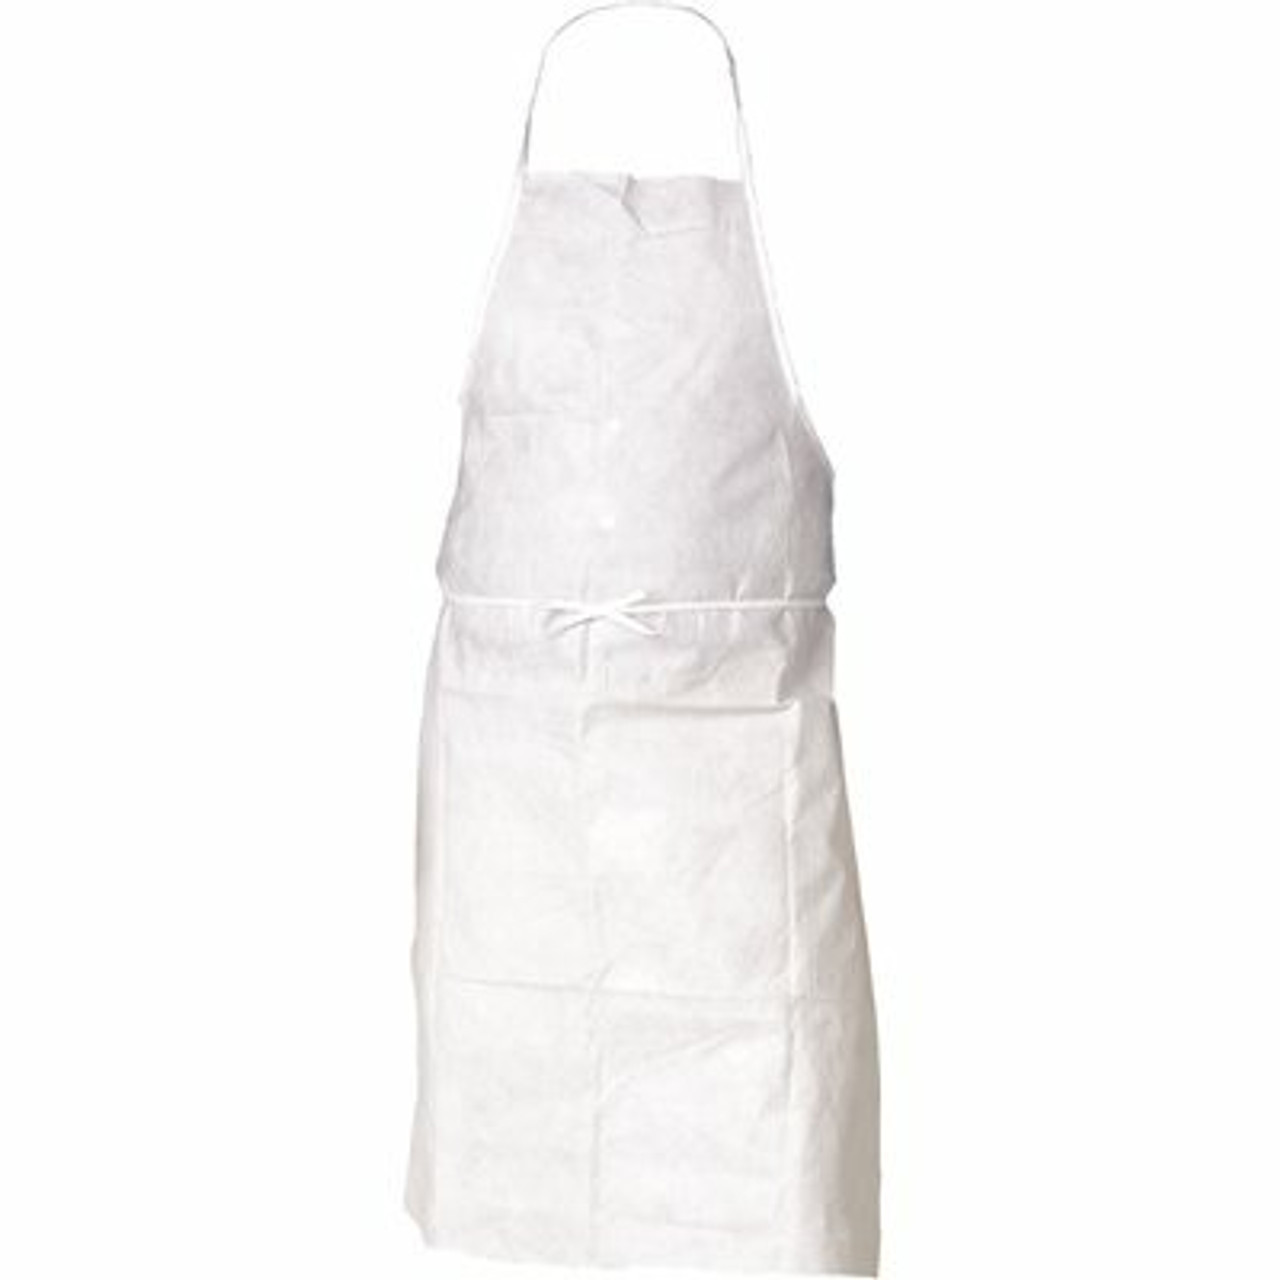 A20 Breathable Particle Protection Apron (36550), Universal Size, Tie Back, White, 100 / Case, 10 Bags Of 10 Aprons